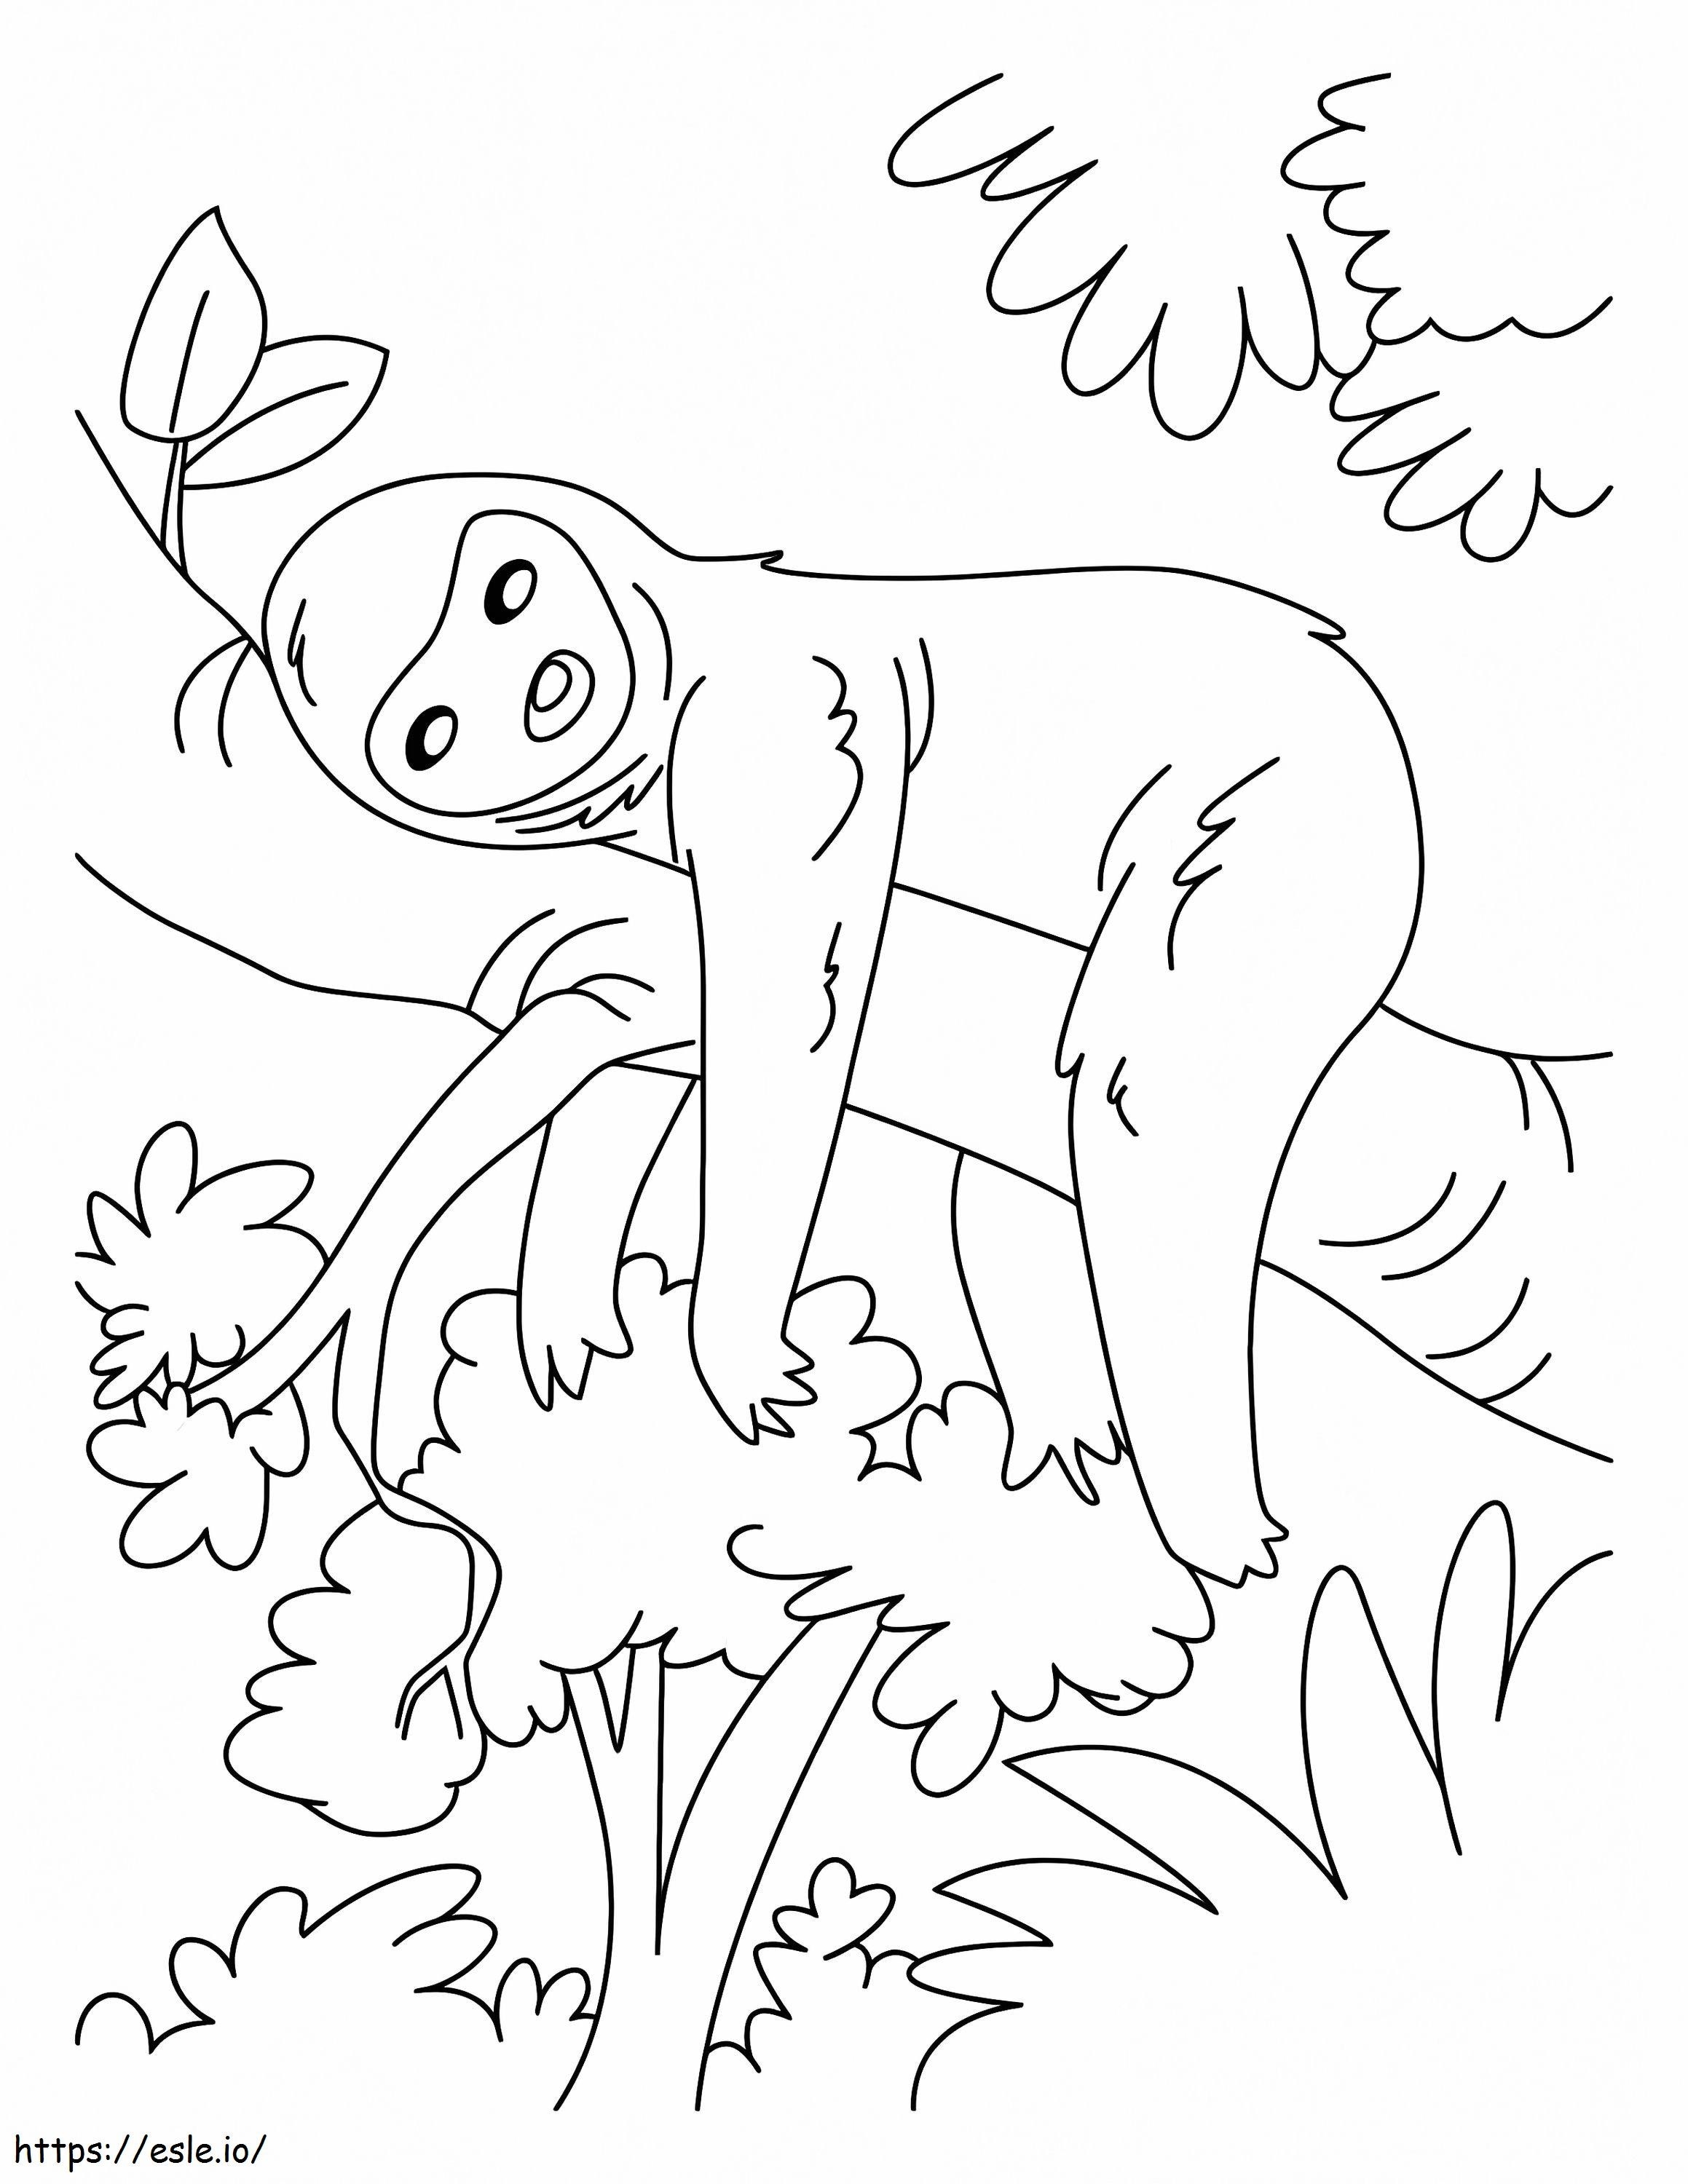 Sloth 1 coloring page